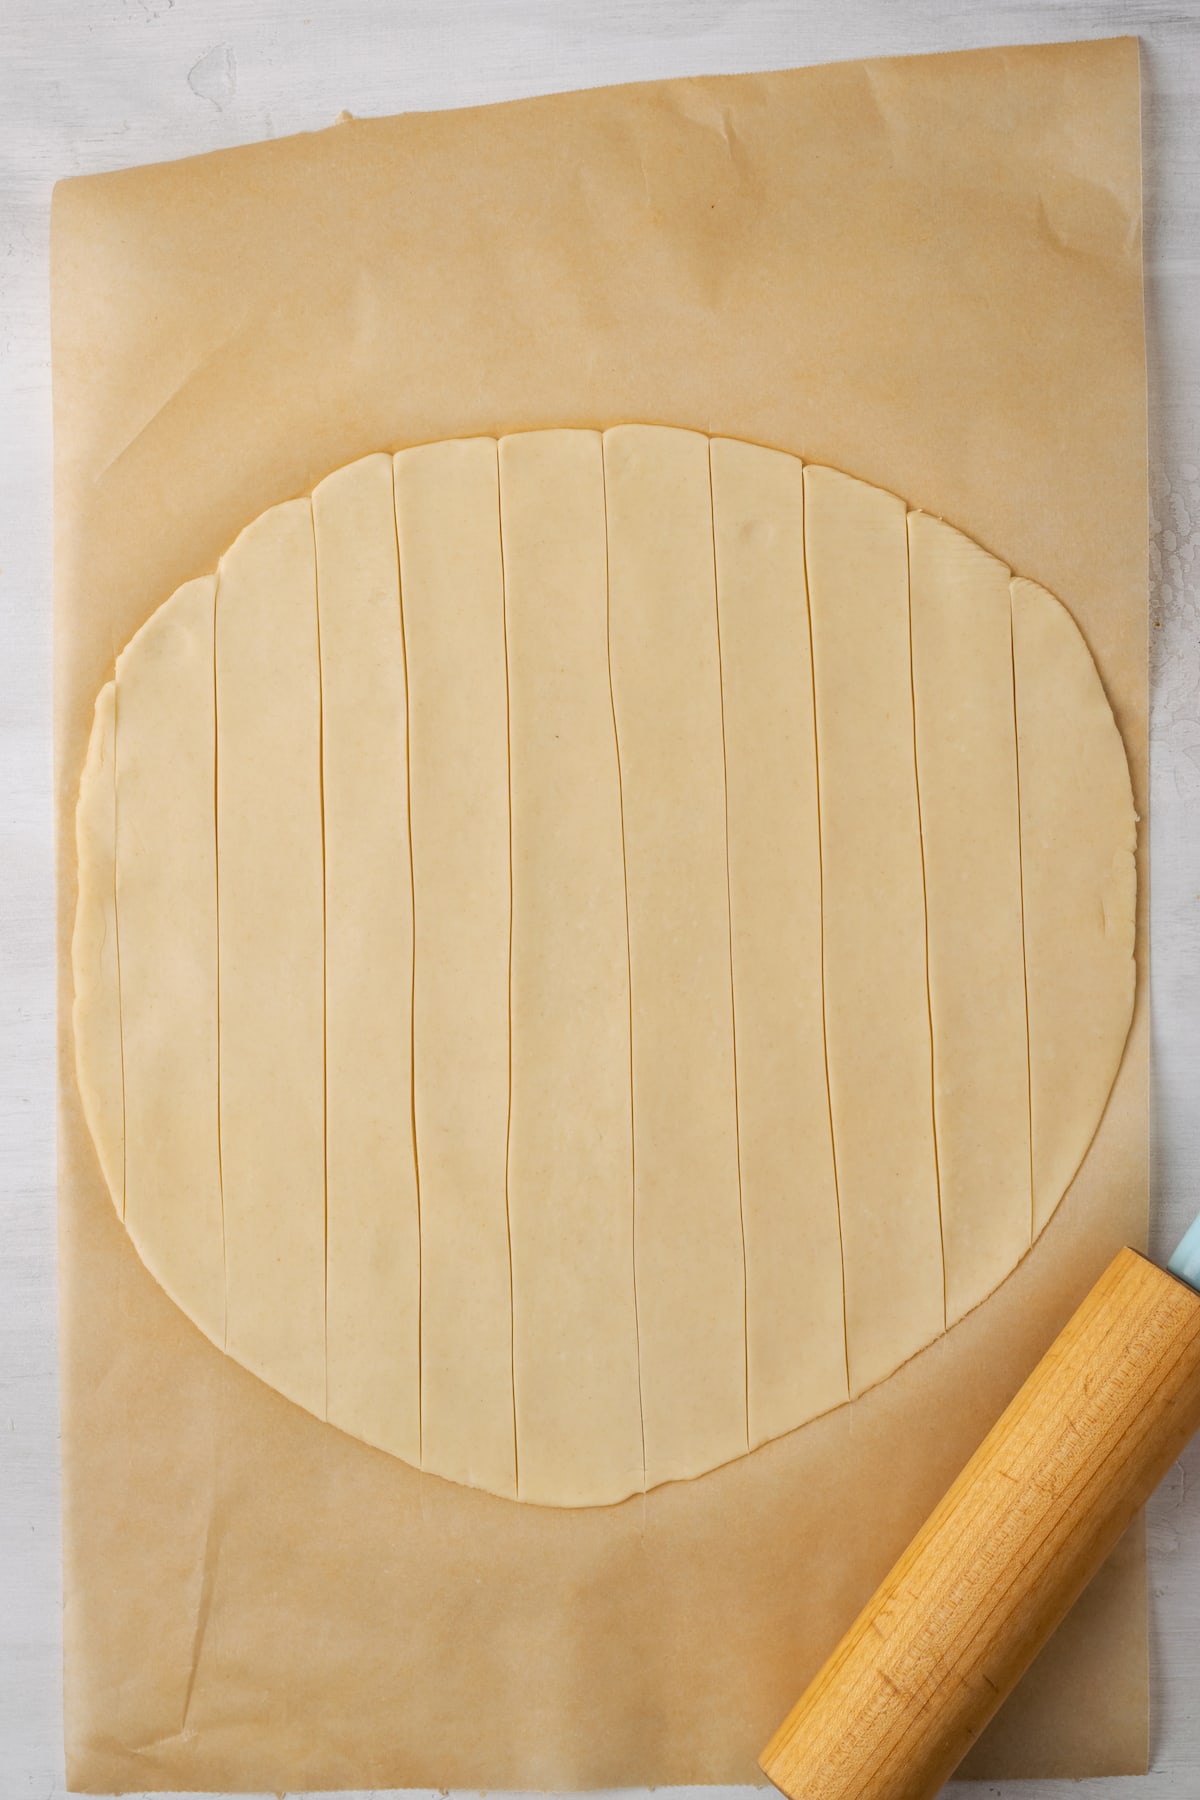 A round, rolled out pie crust on a piece of parchment paper, cut into strips for the lattice crust.